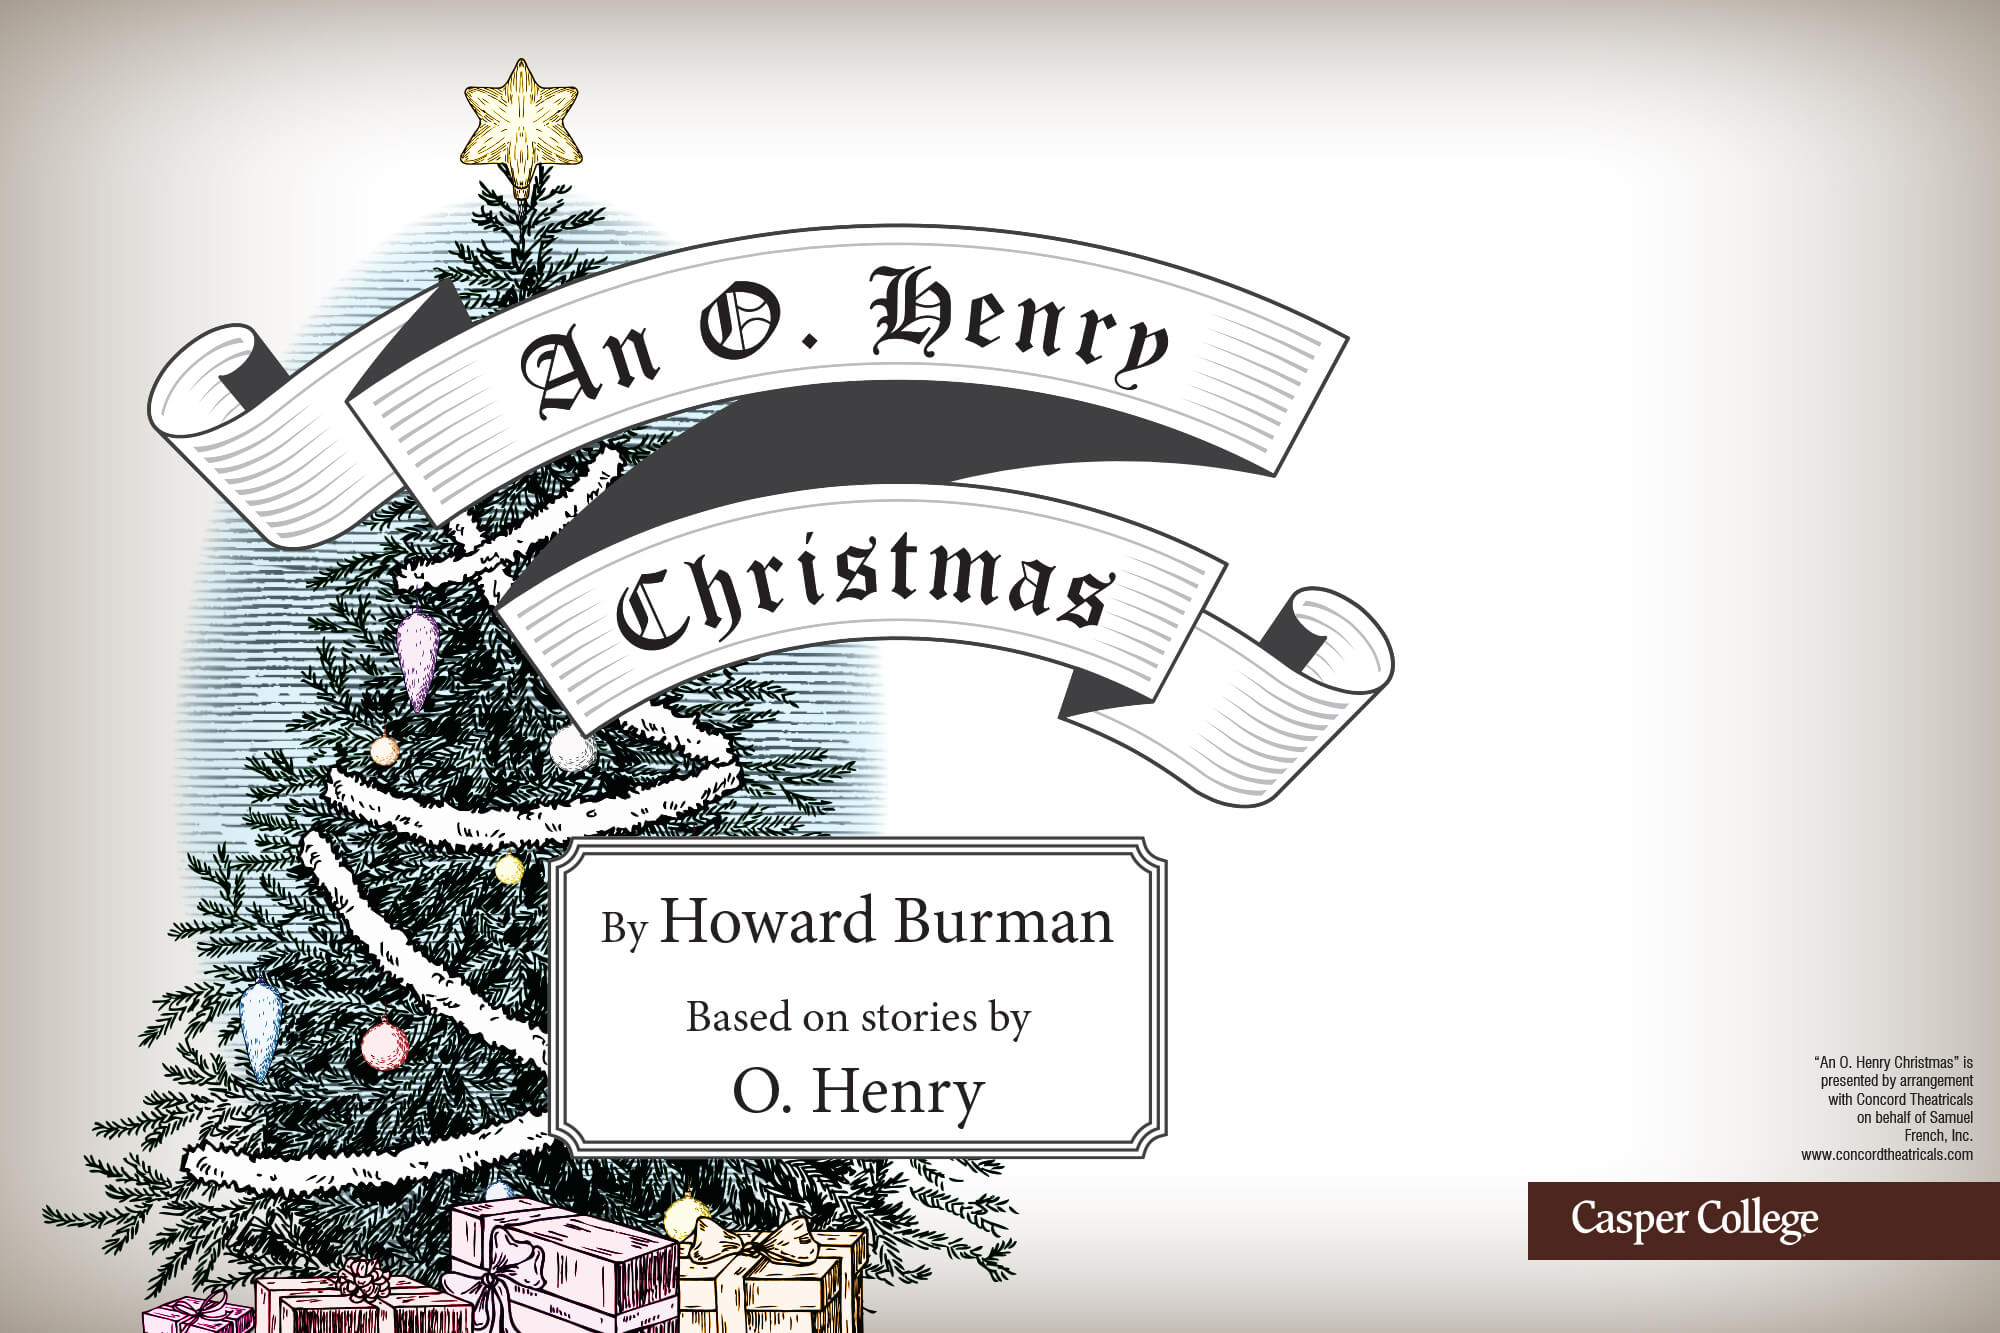 Image for "An O. Henry Christmas" press release.